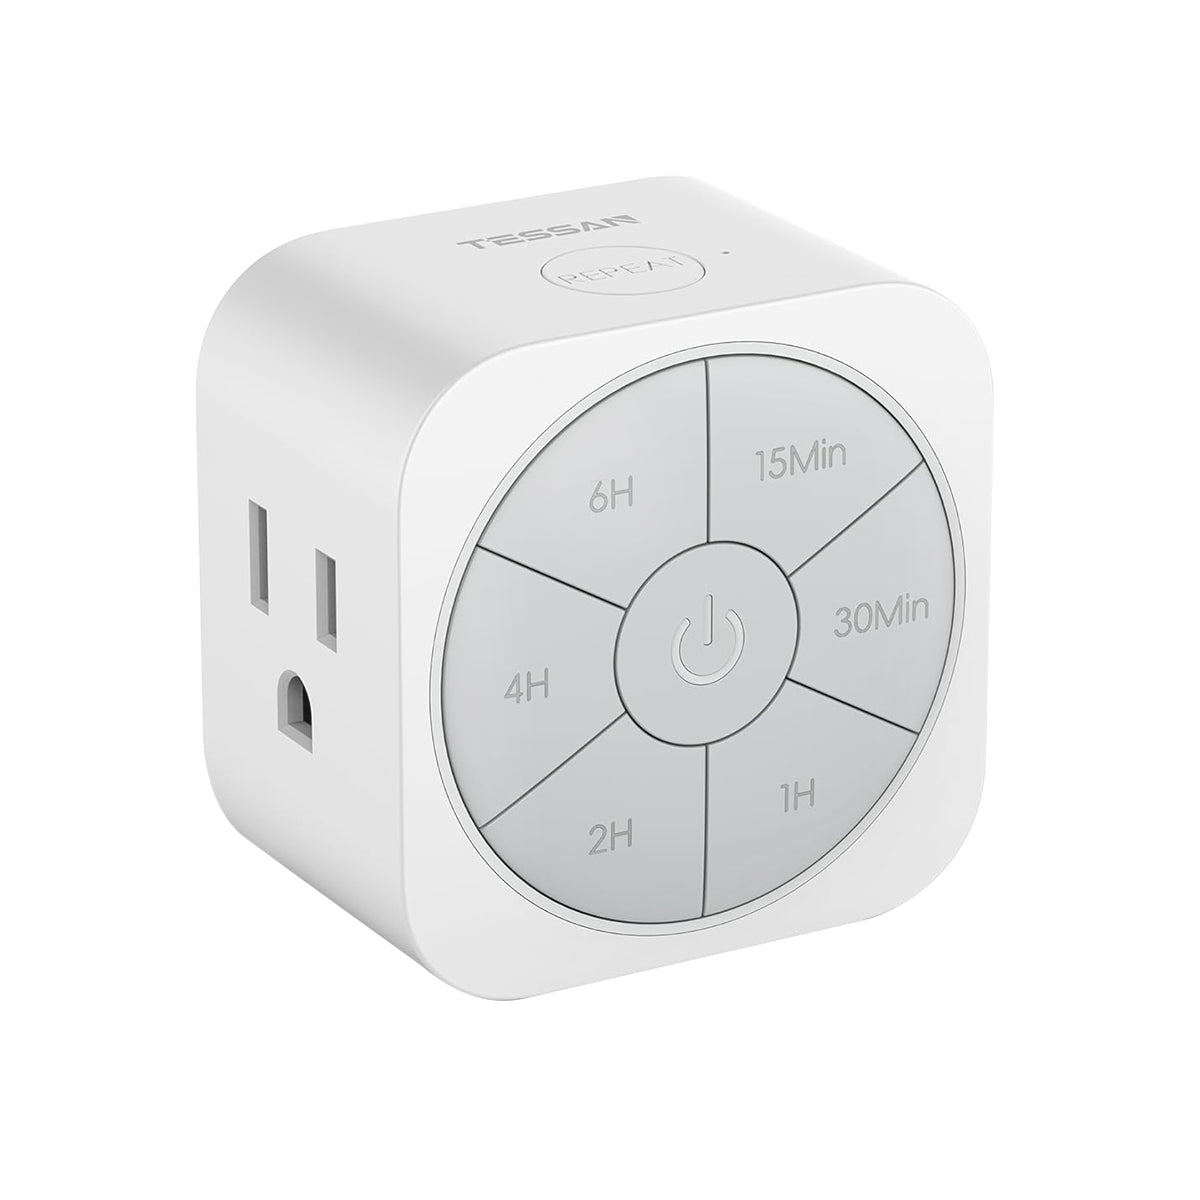 Timer Outlet Indoor, Countdown Electrical Outlet Timer Up to 6H